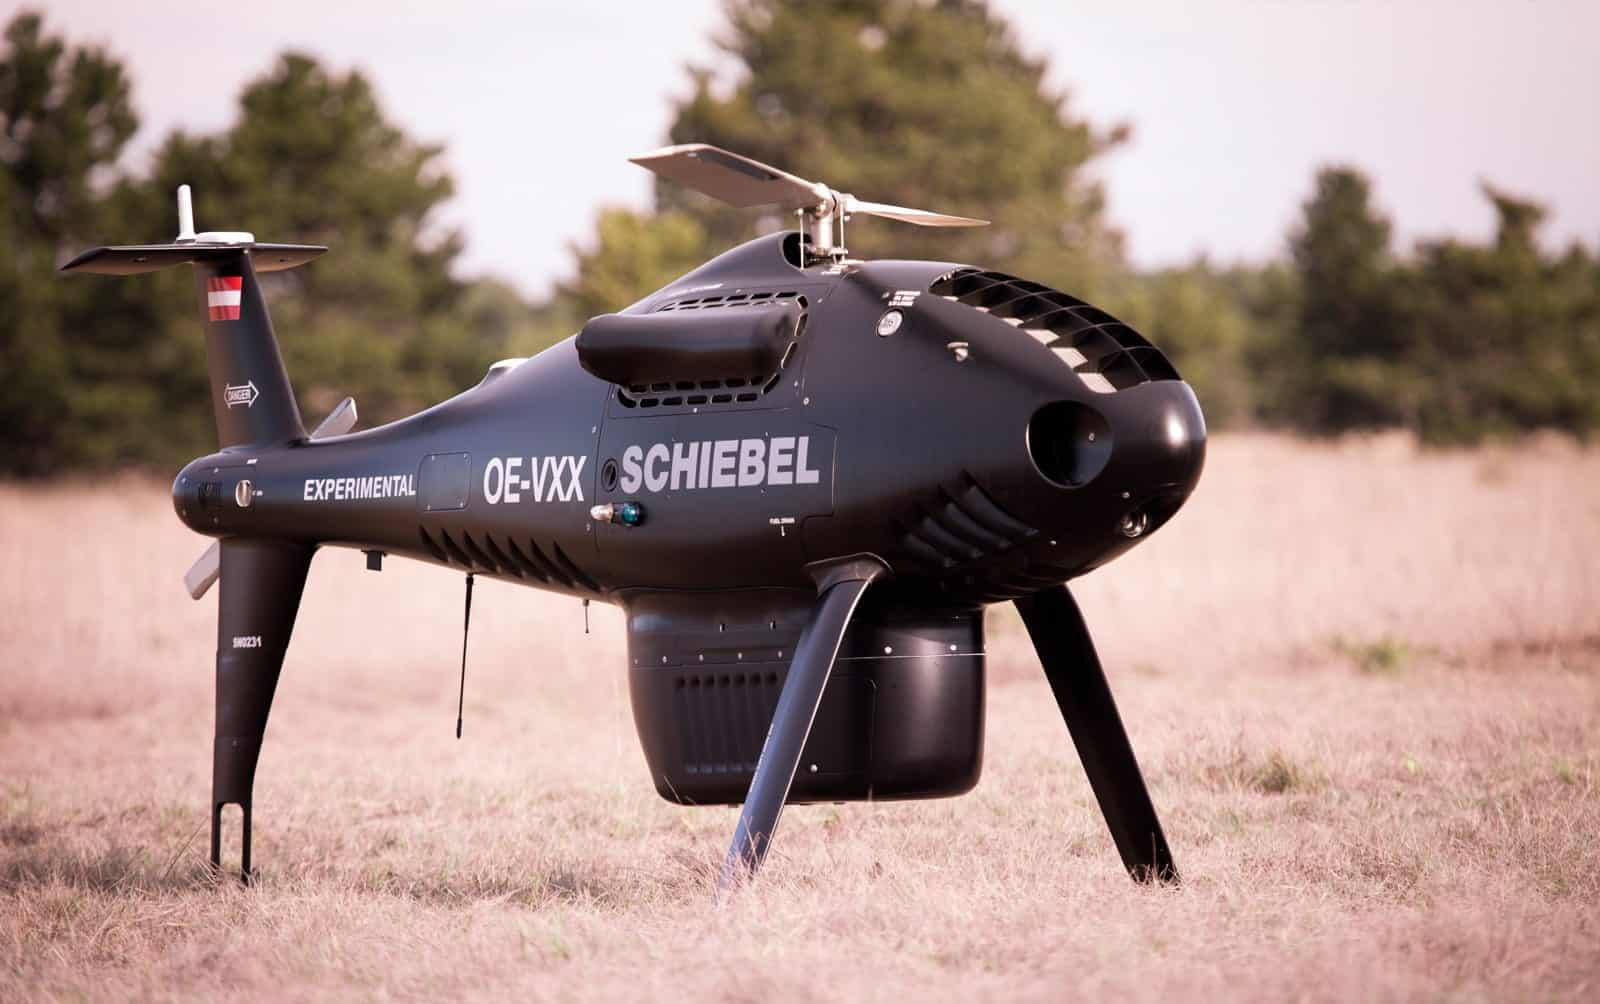 Camcopter s-100垂直起降无人机